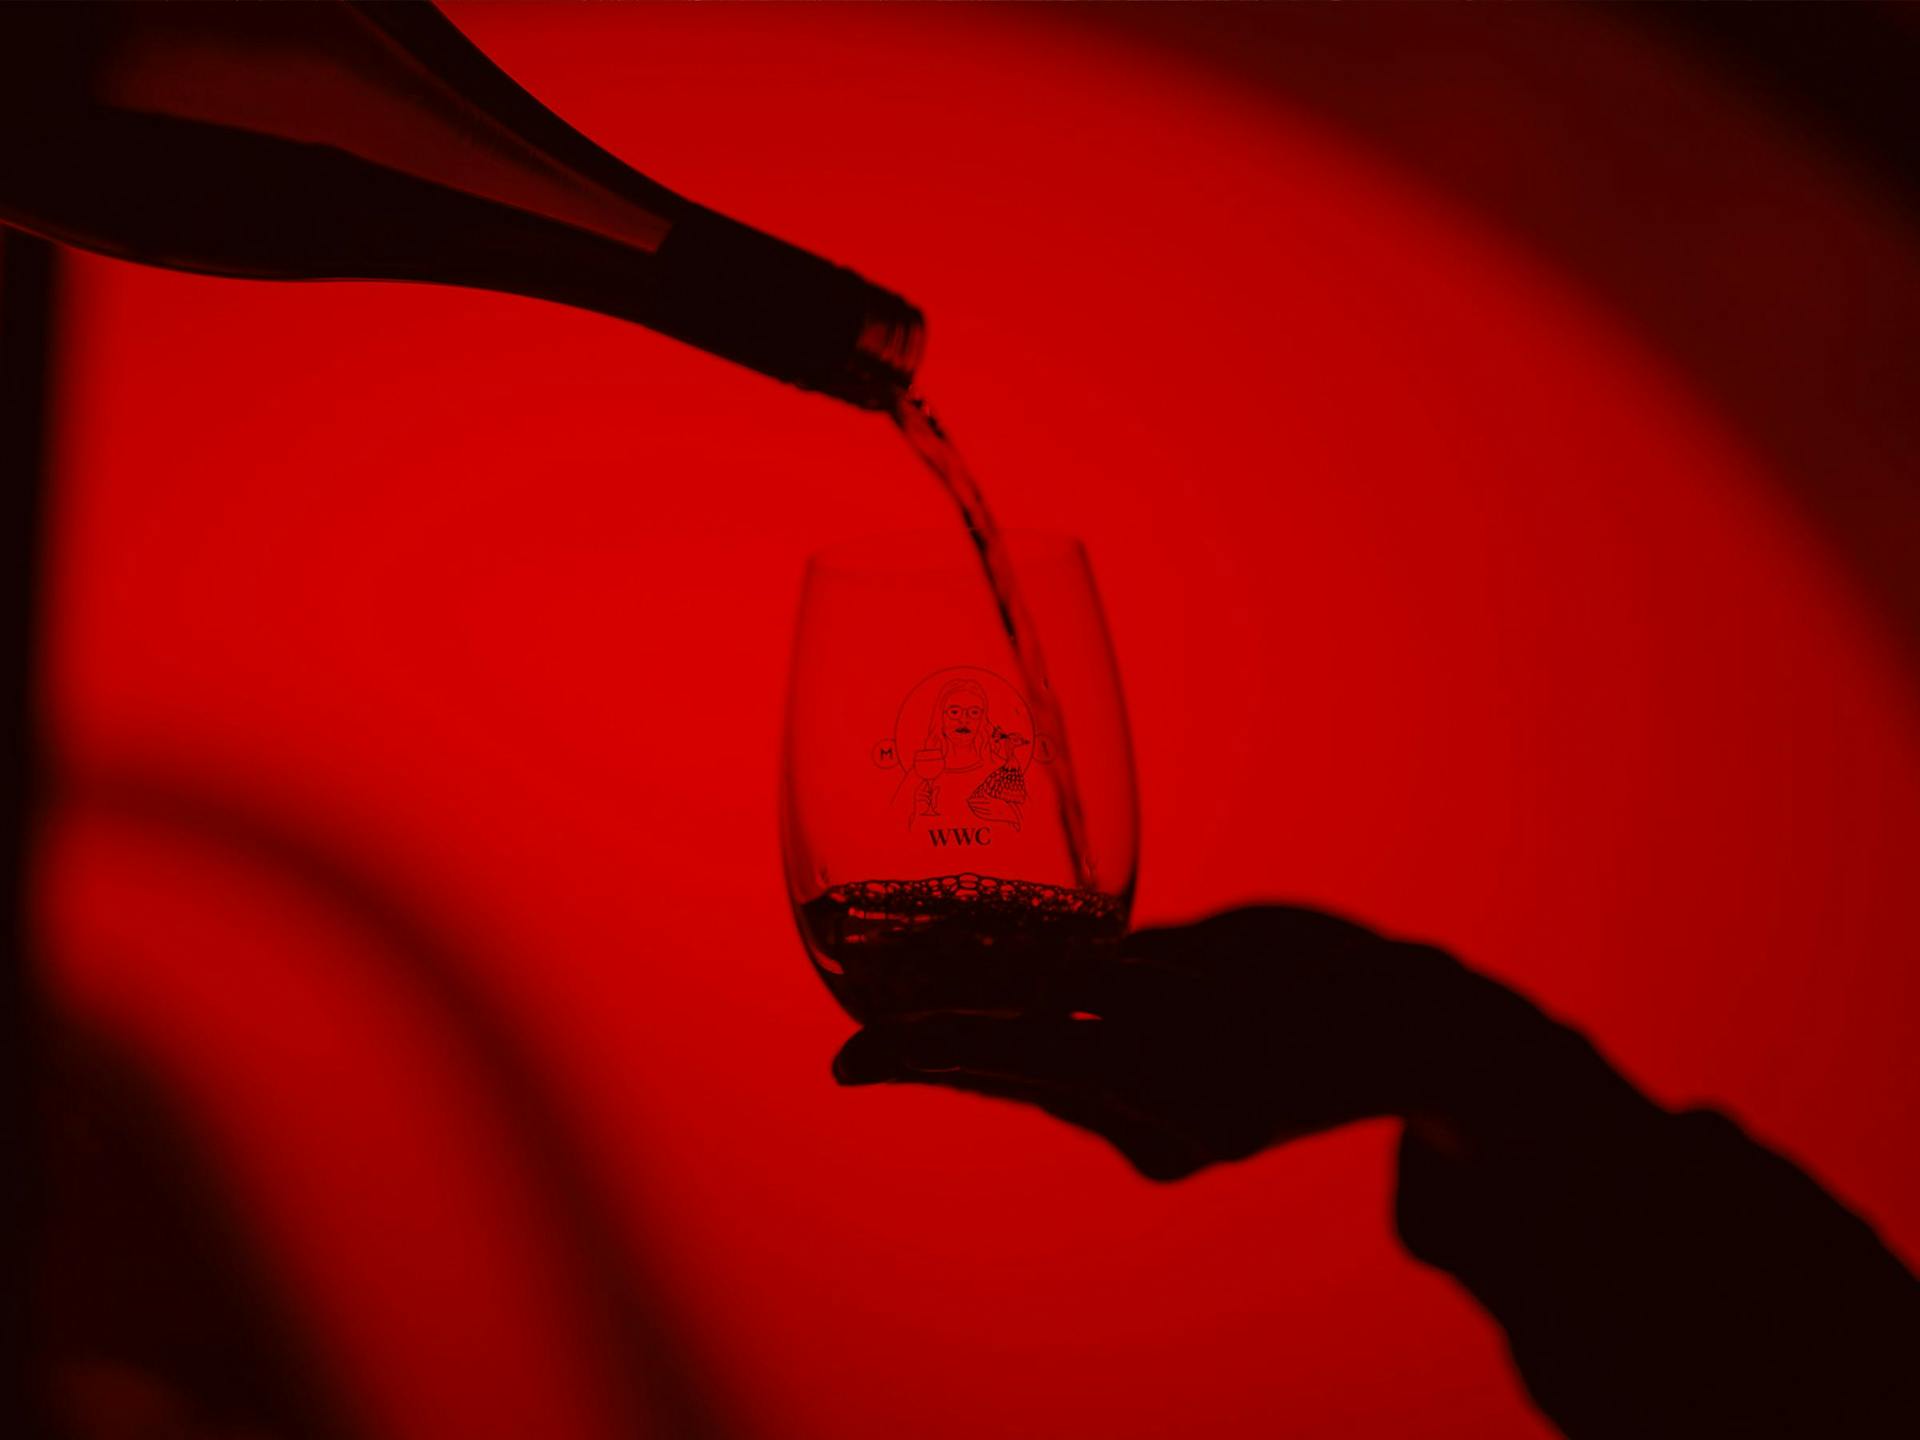 A glass of wine being poured against a bright red background. All you can see is the silhouette of the hand holding a glass and the shadow of the bottle pouring white wine.